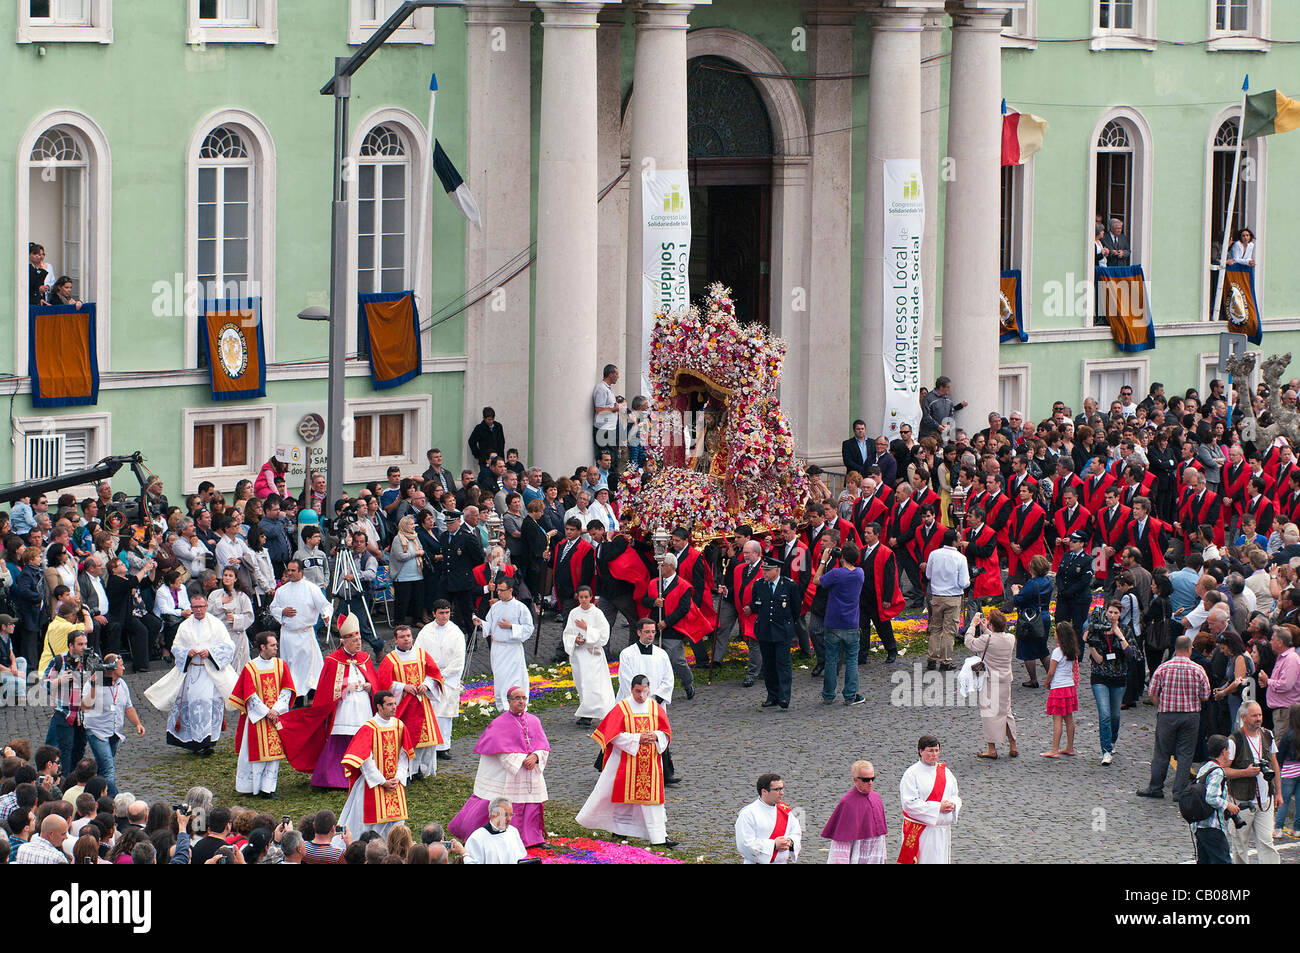 May 13th 2012. Sunday procession from the festivities of the ECCE HOMO. In the image is monsignor D. Rino Passigato that presides the festivities and also the bishop of the Azores, D. António Sousa Braga. These are the biggest religious festivities in the Azores Archipelago. Stock Photo